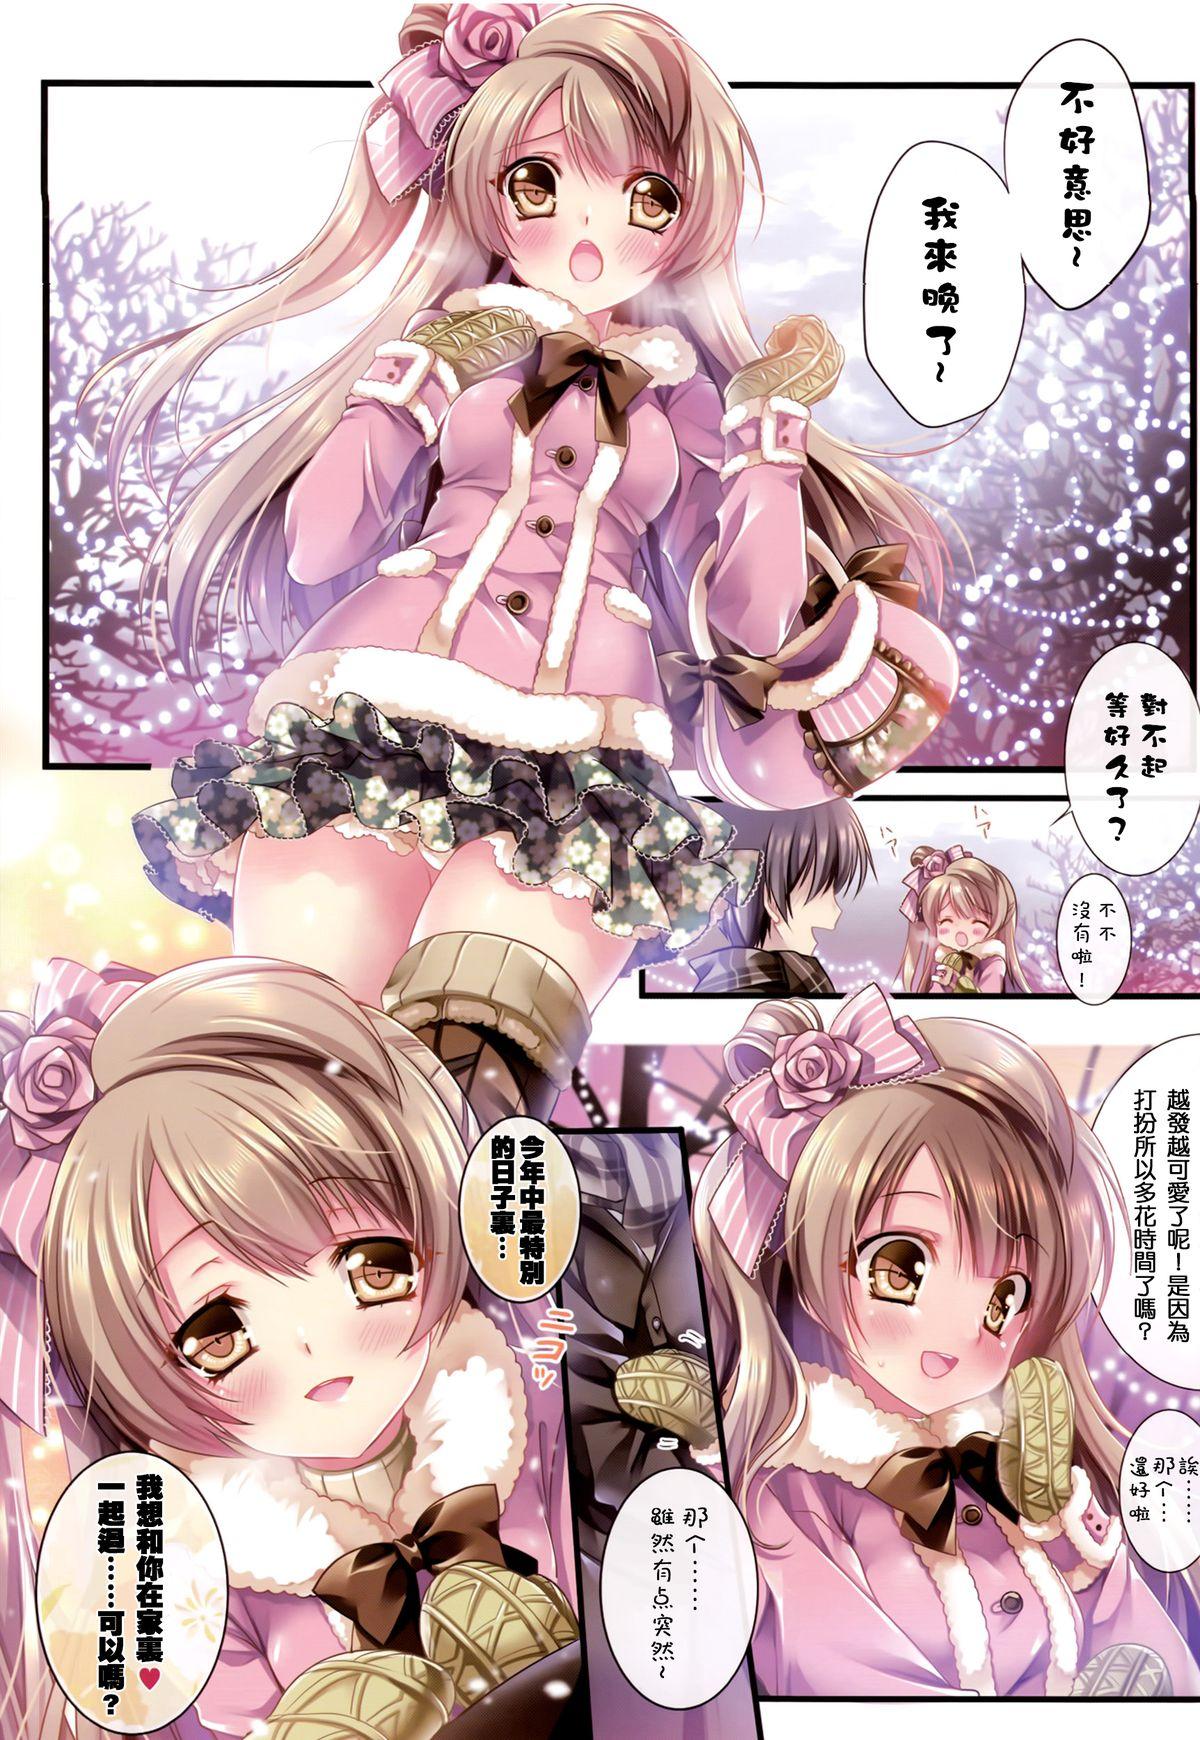 Ass Kotori no SPECIAL LOVE SET - Love live Hot Girls Getting Fucked - Page 6